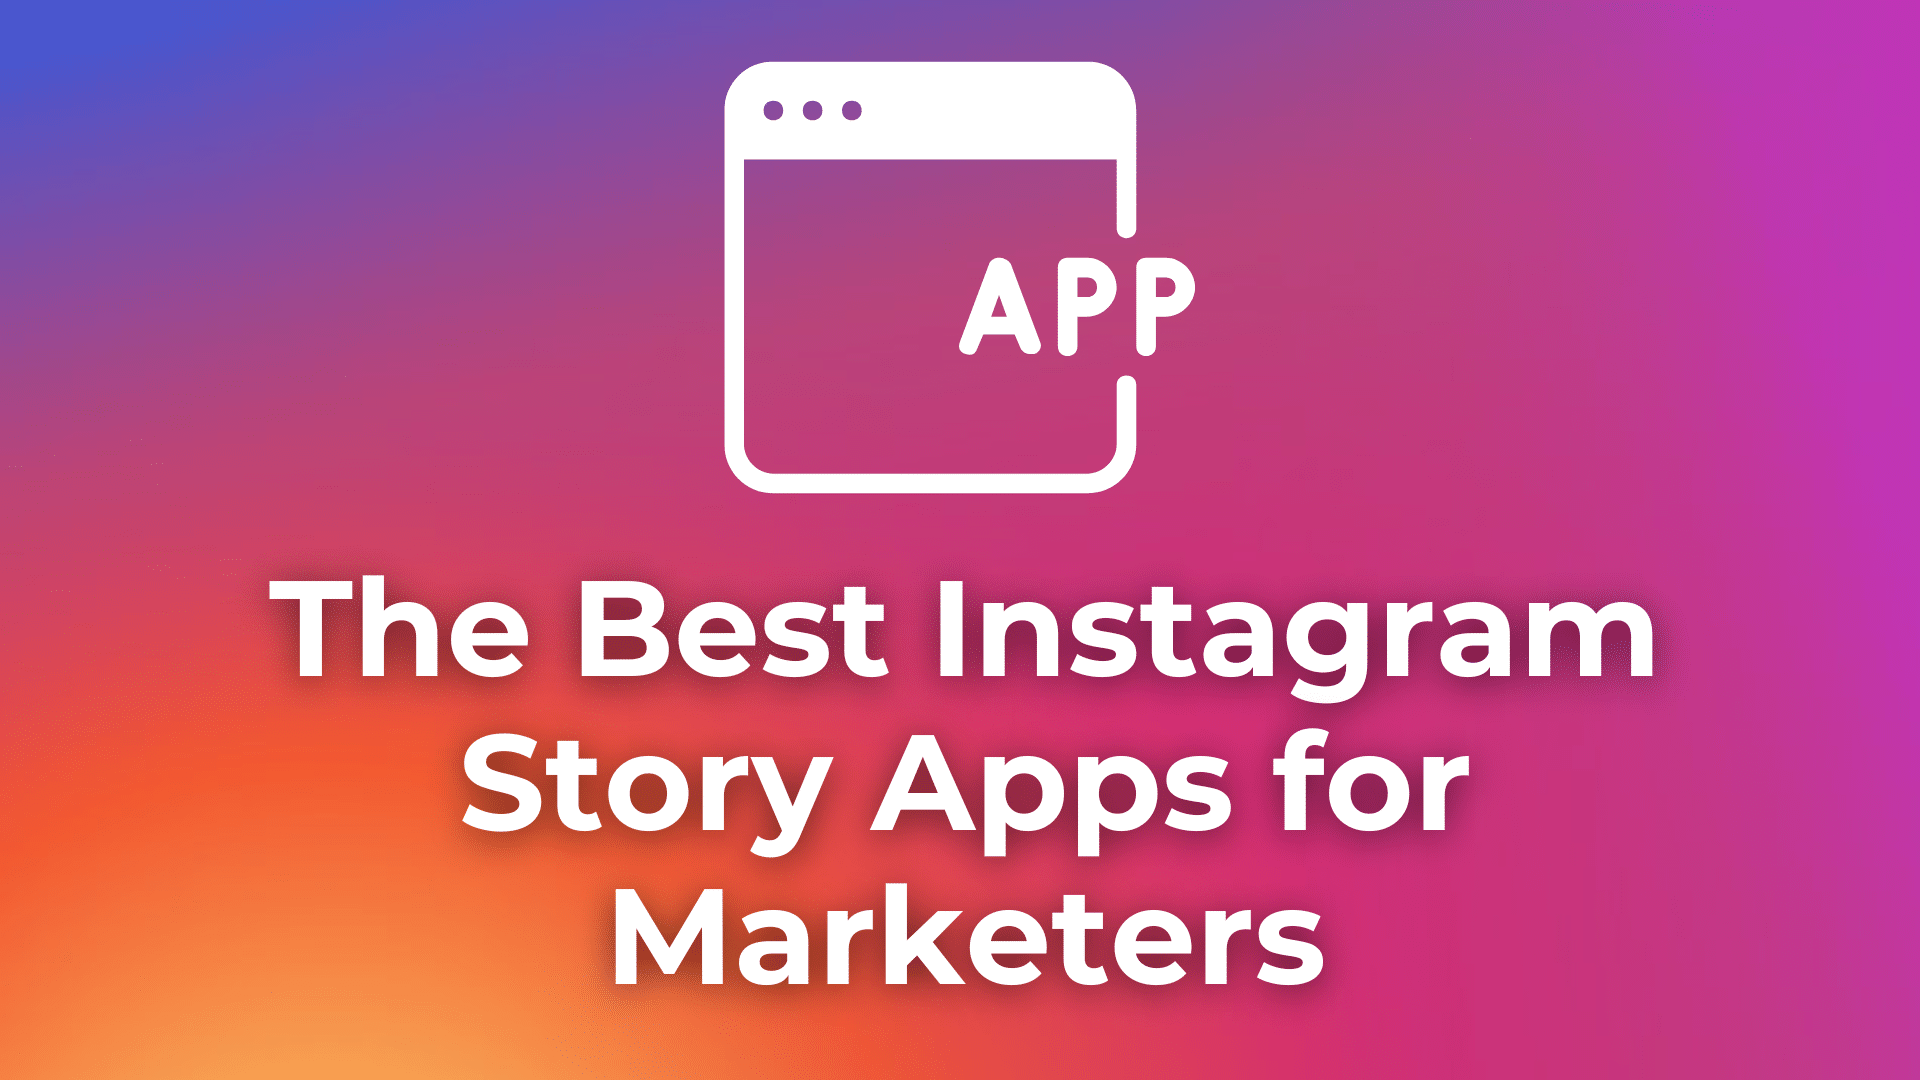 The Best Instagram Story Apps for Marketers